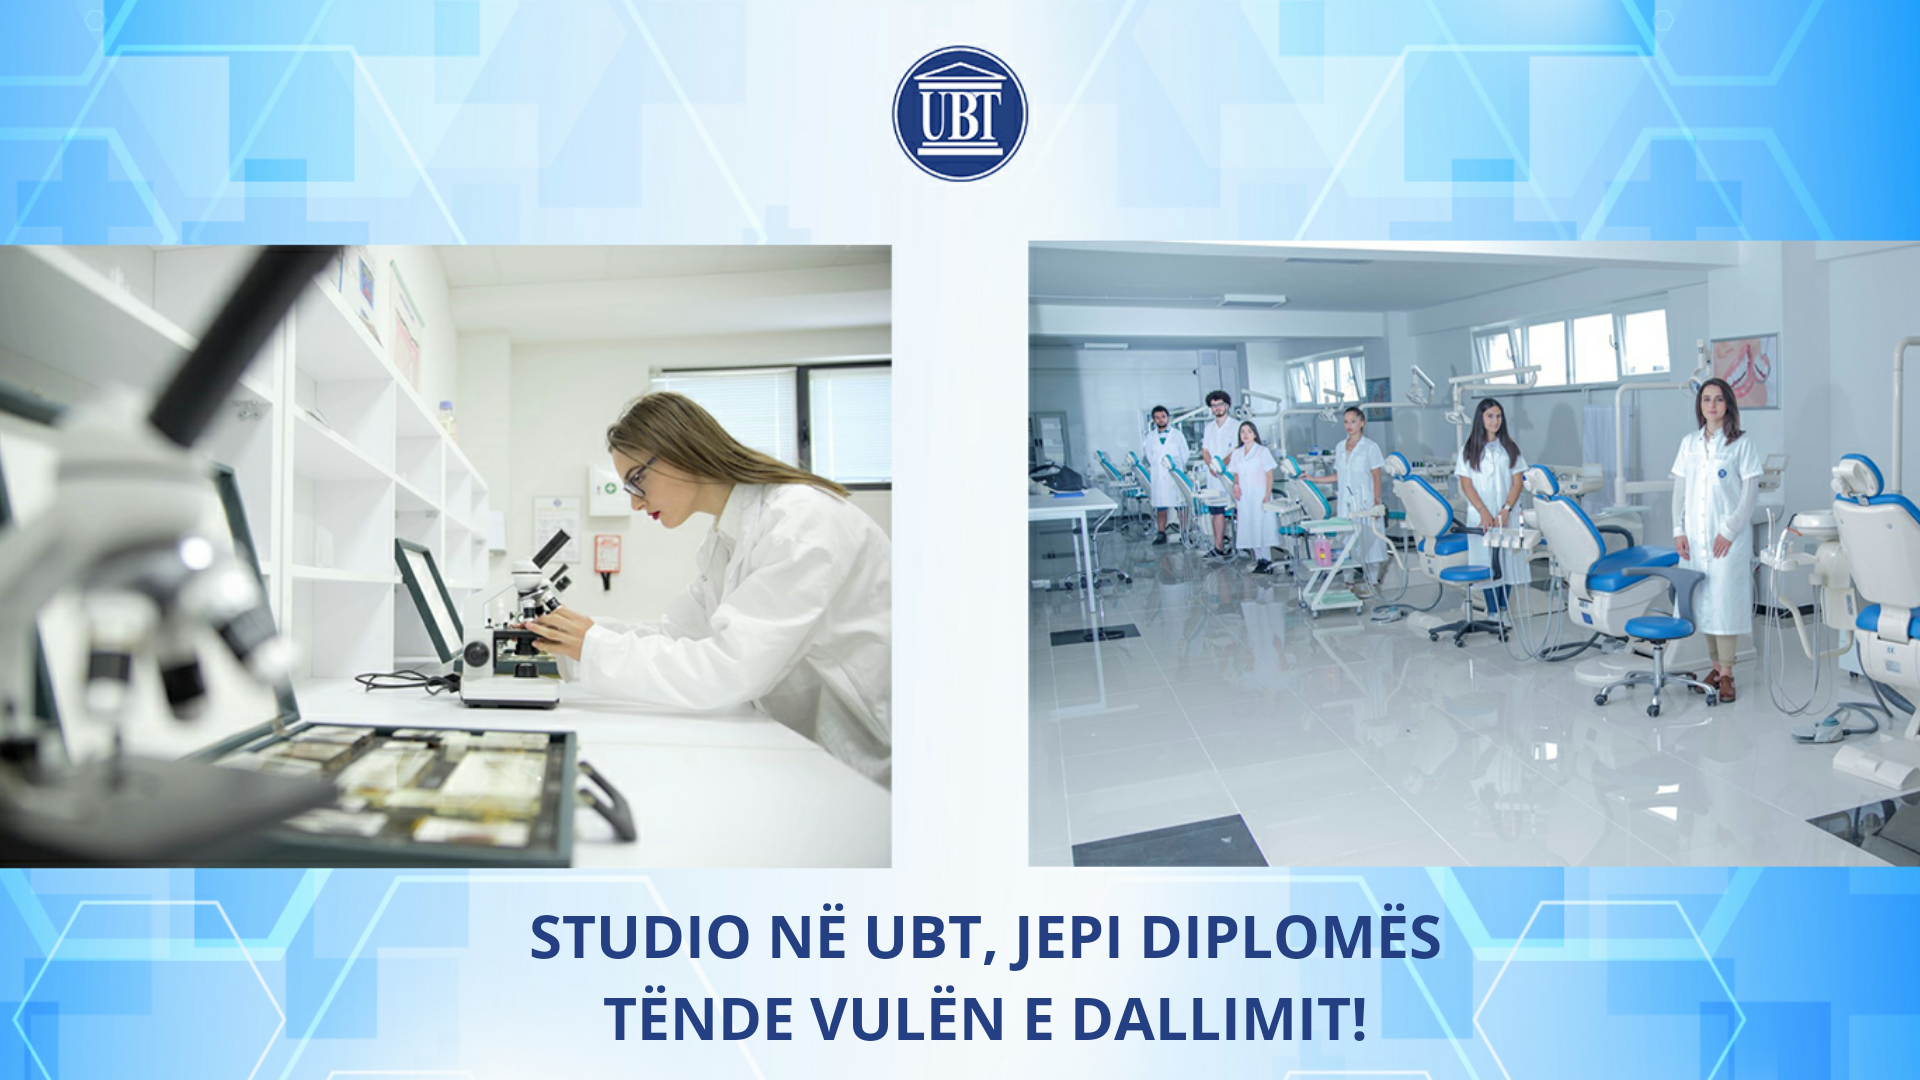 UBT has accredited the study programs in Dentistry and Pharmacy